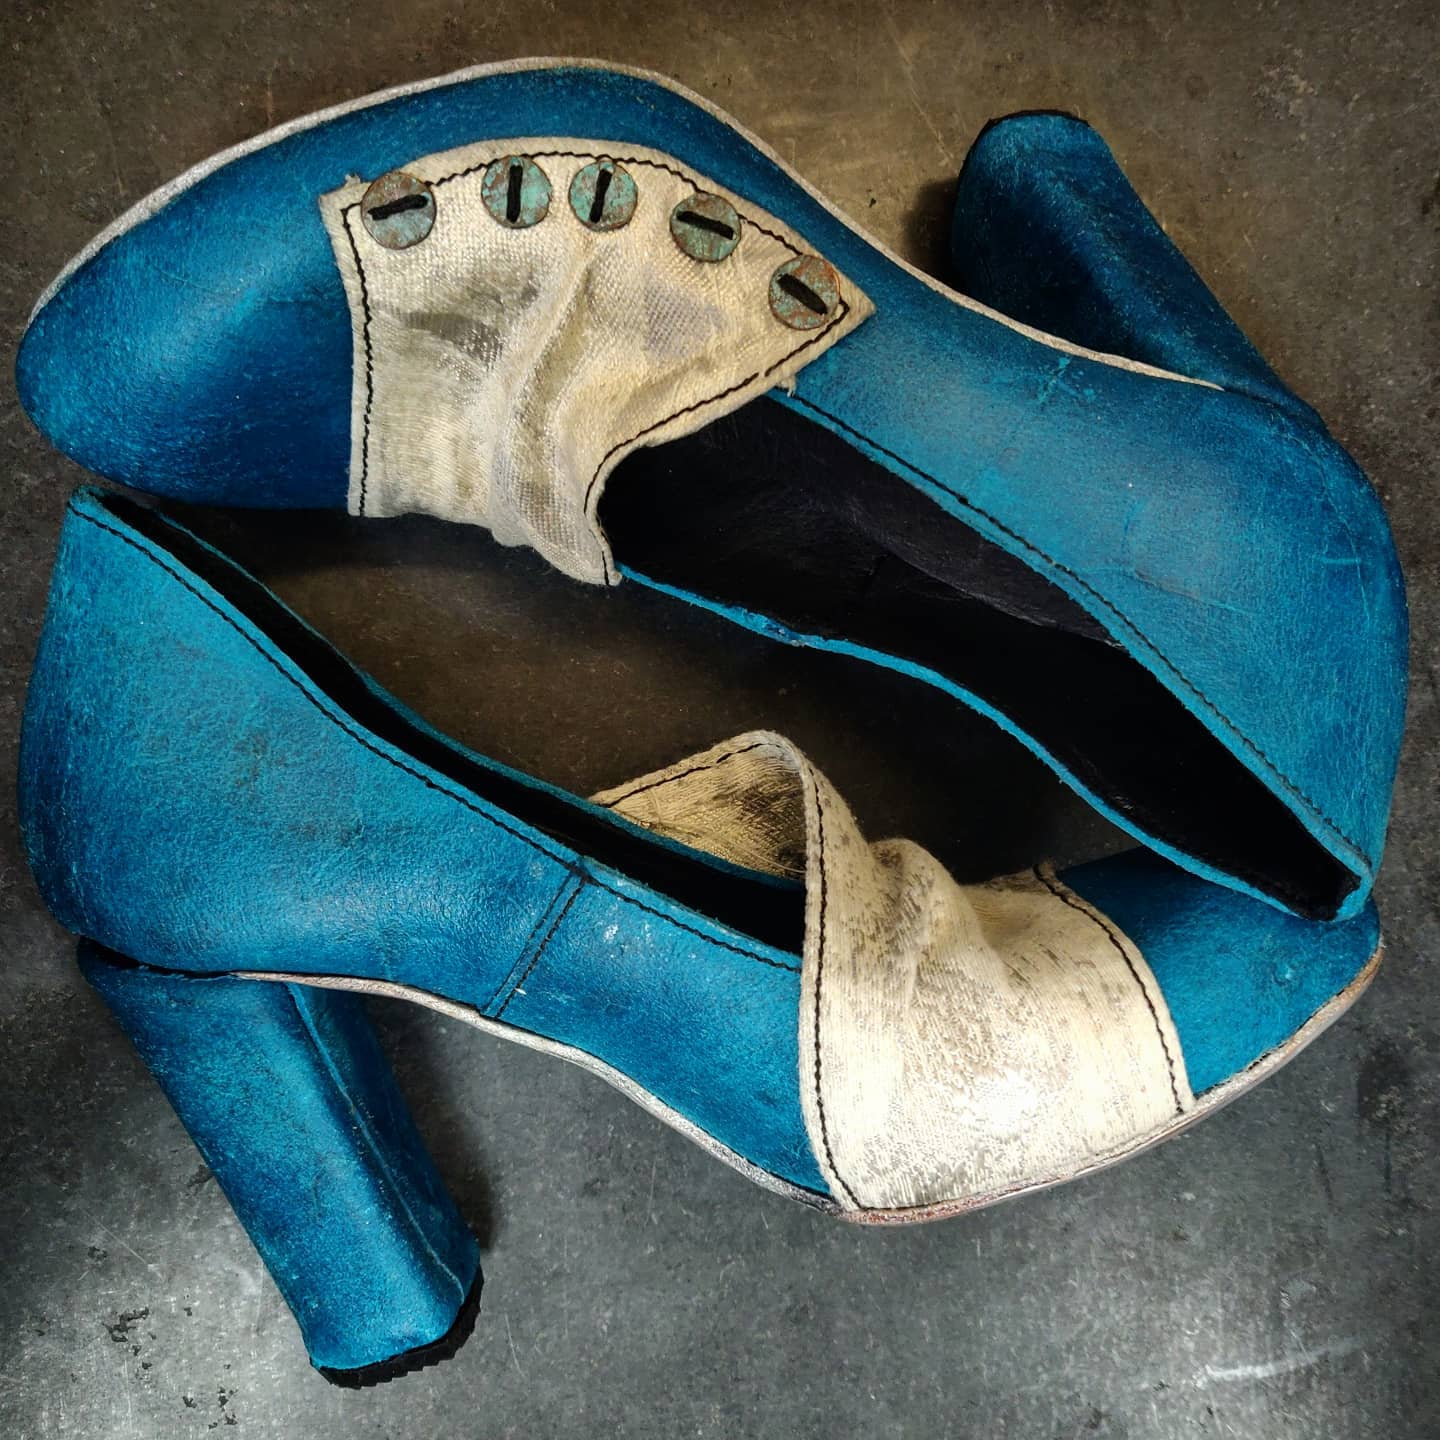 Focus on the lateral side of the shoes and the play of contrasts between the blue leather and the grey fabric and the silver soles